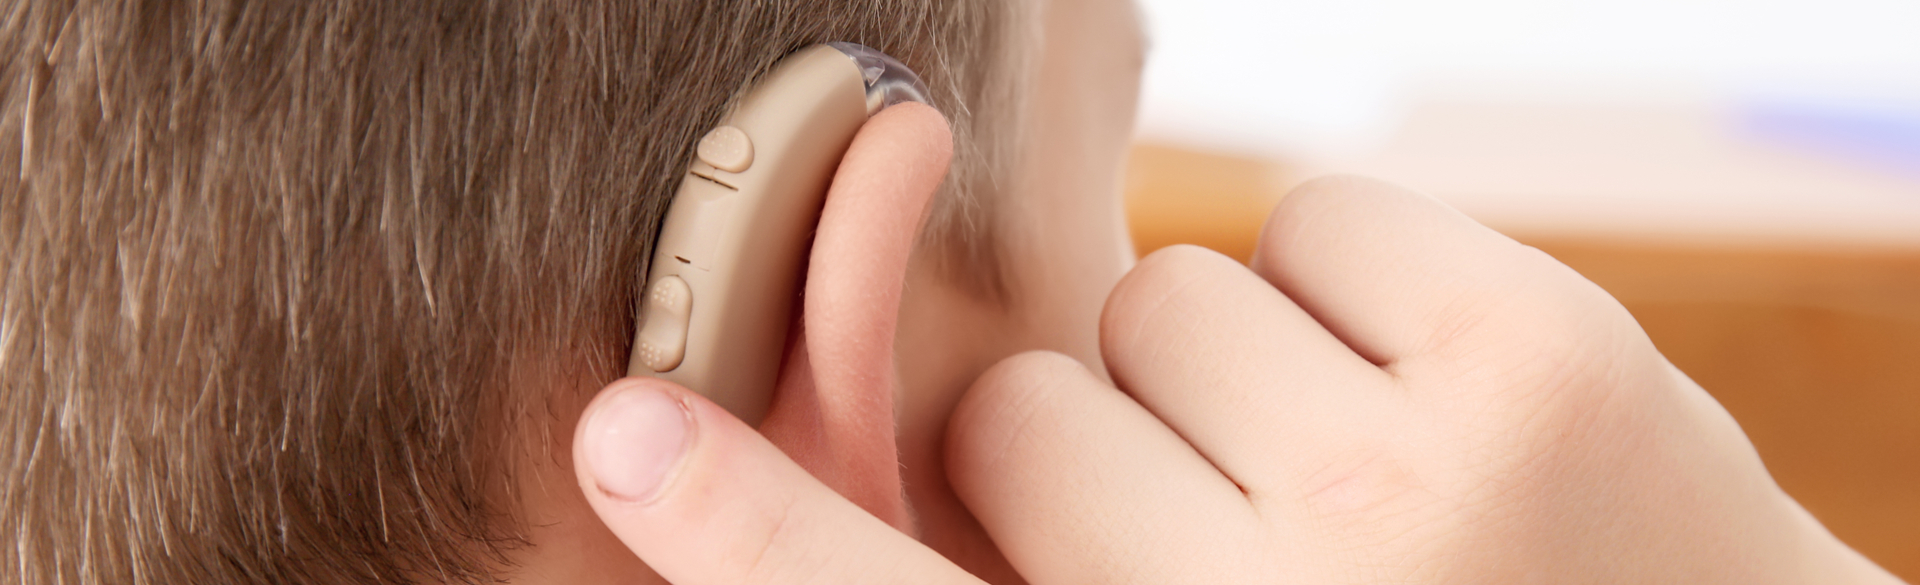 Child adjusting hearing aid in right ear